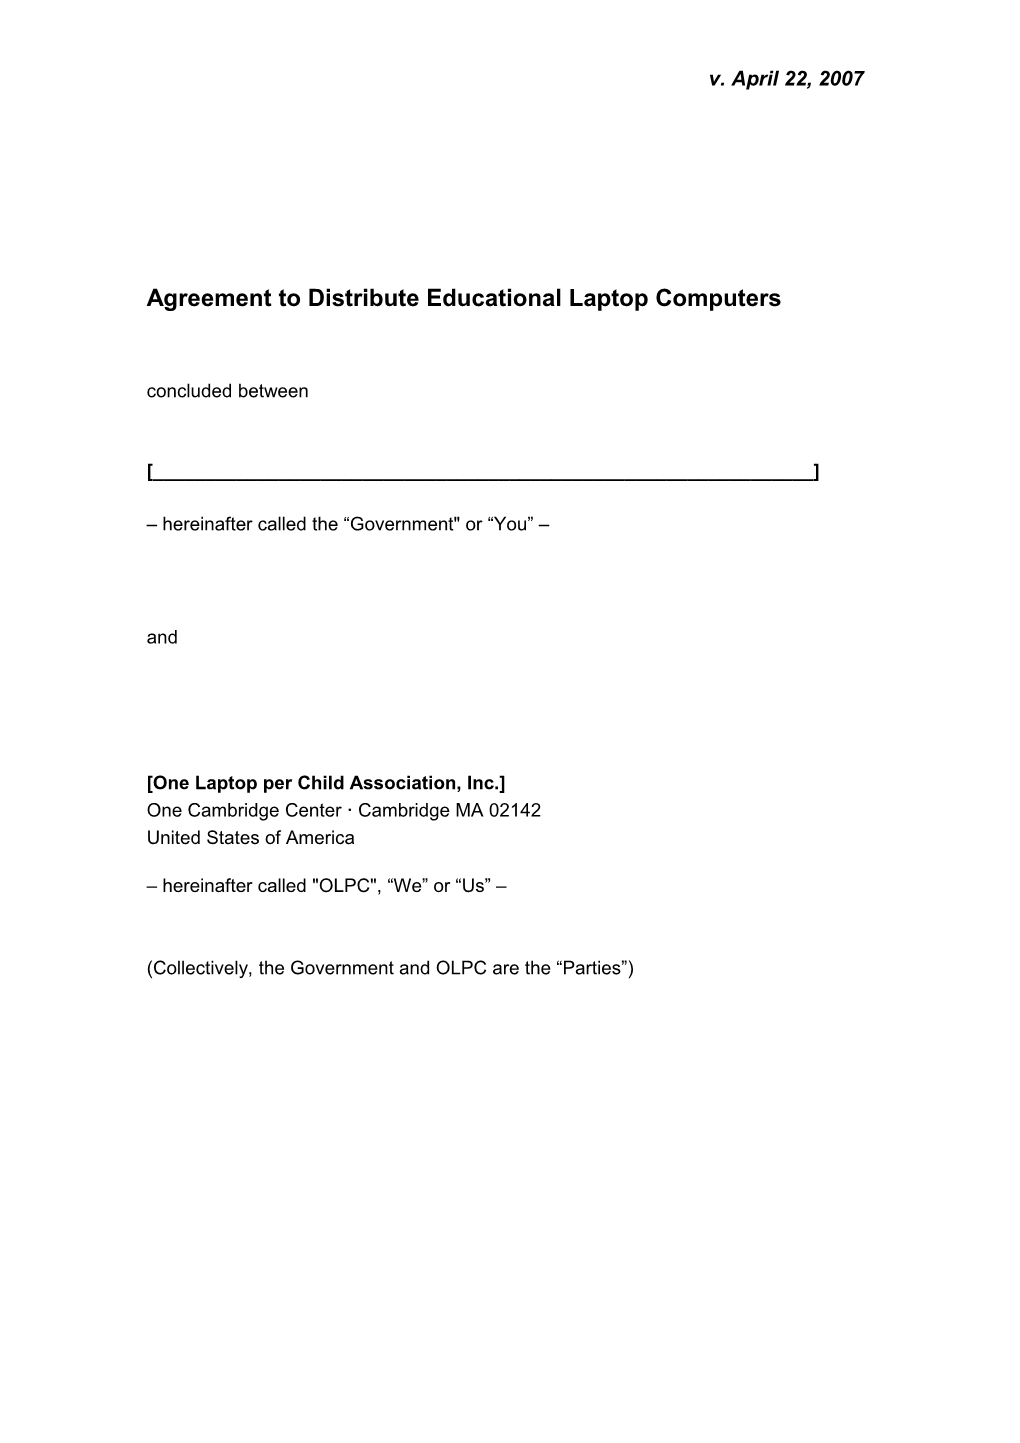 Agreement to Distribute Educational Laptop Computers